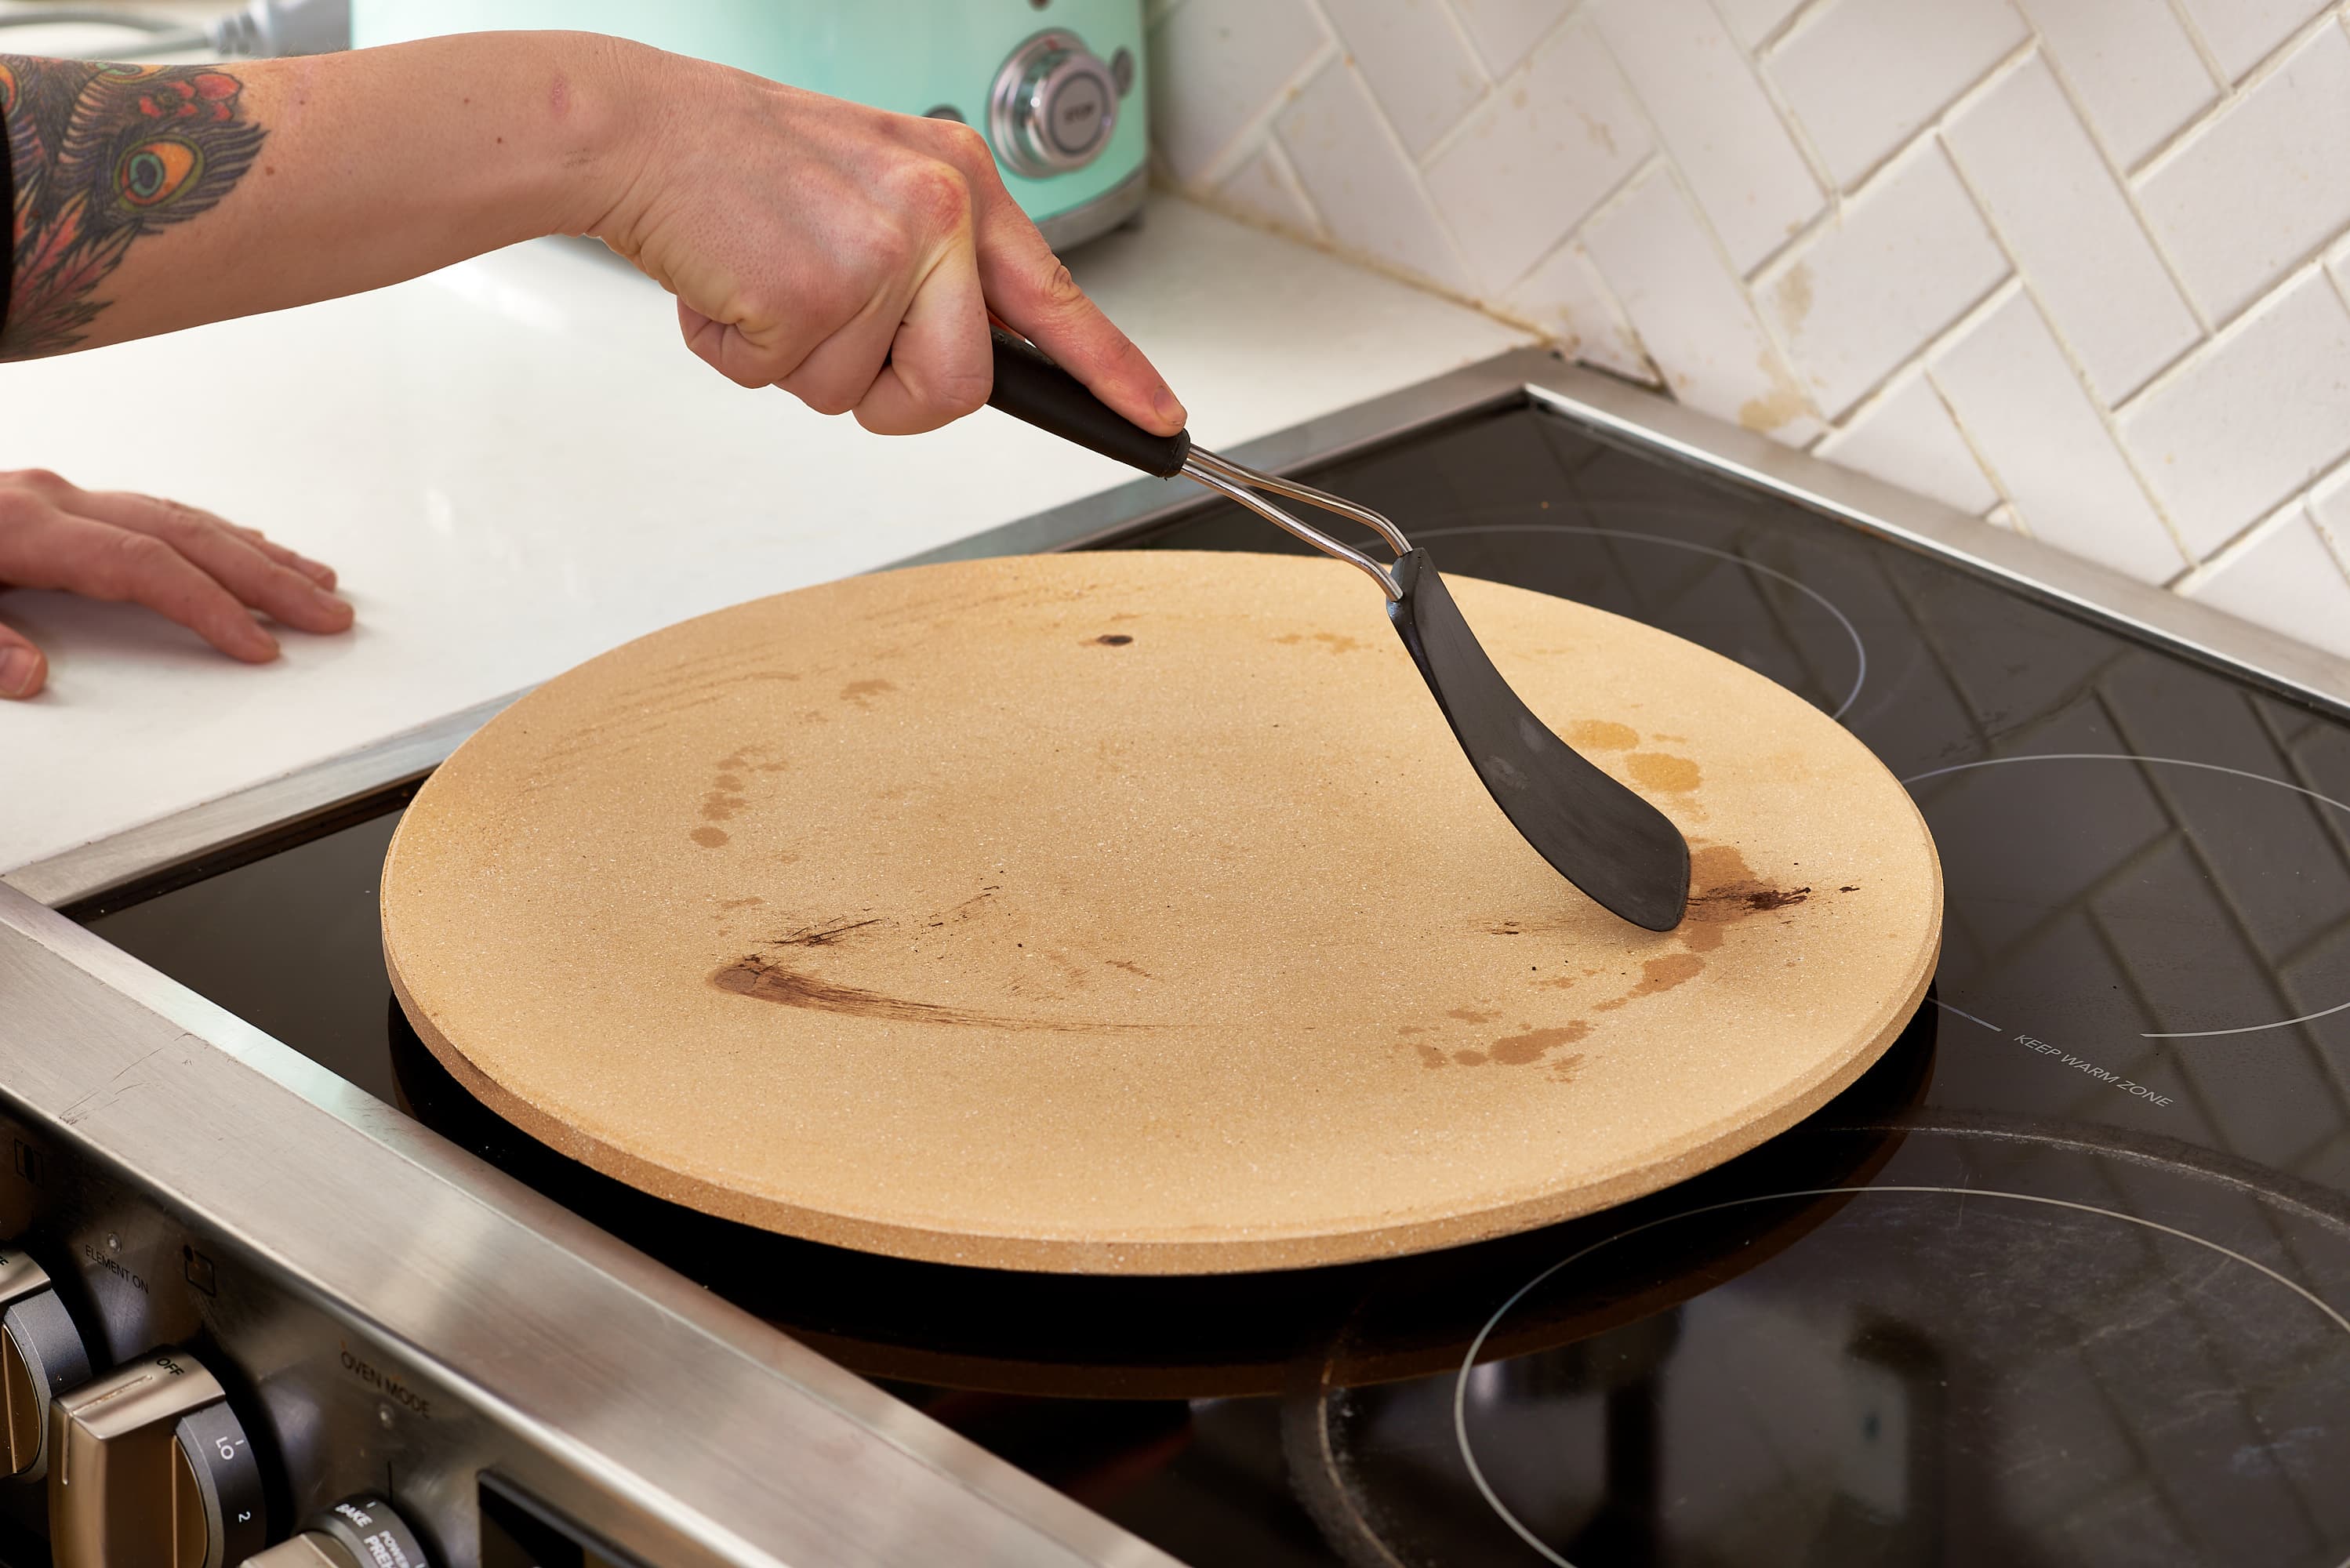 How To Clean a Pizza Stone